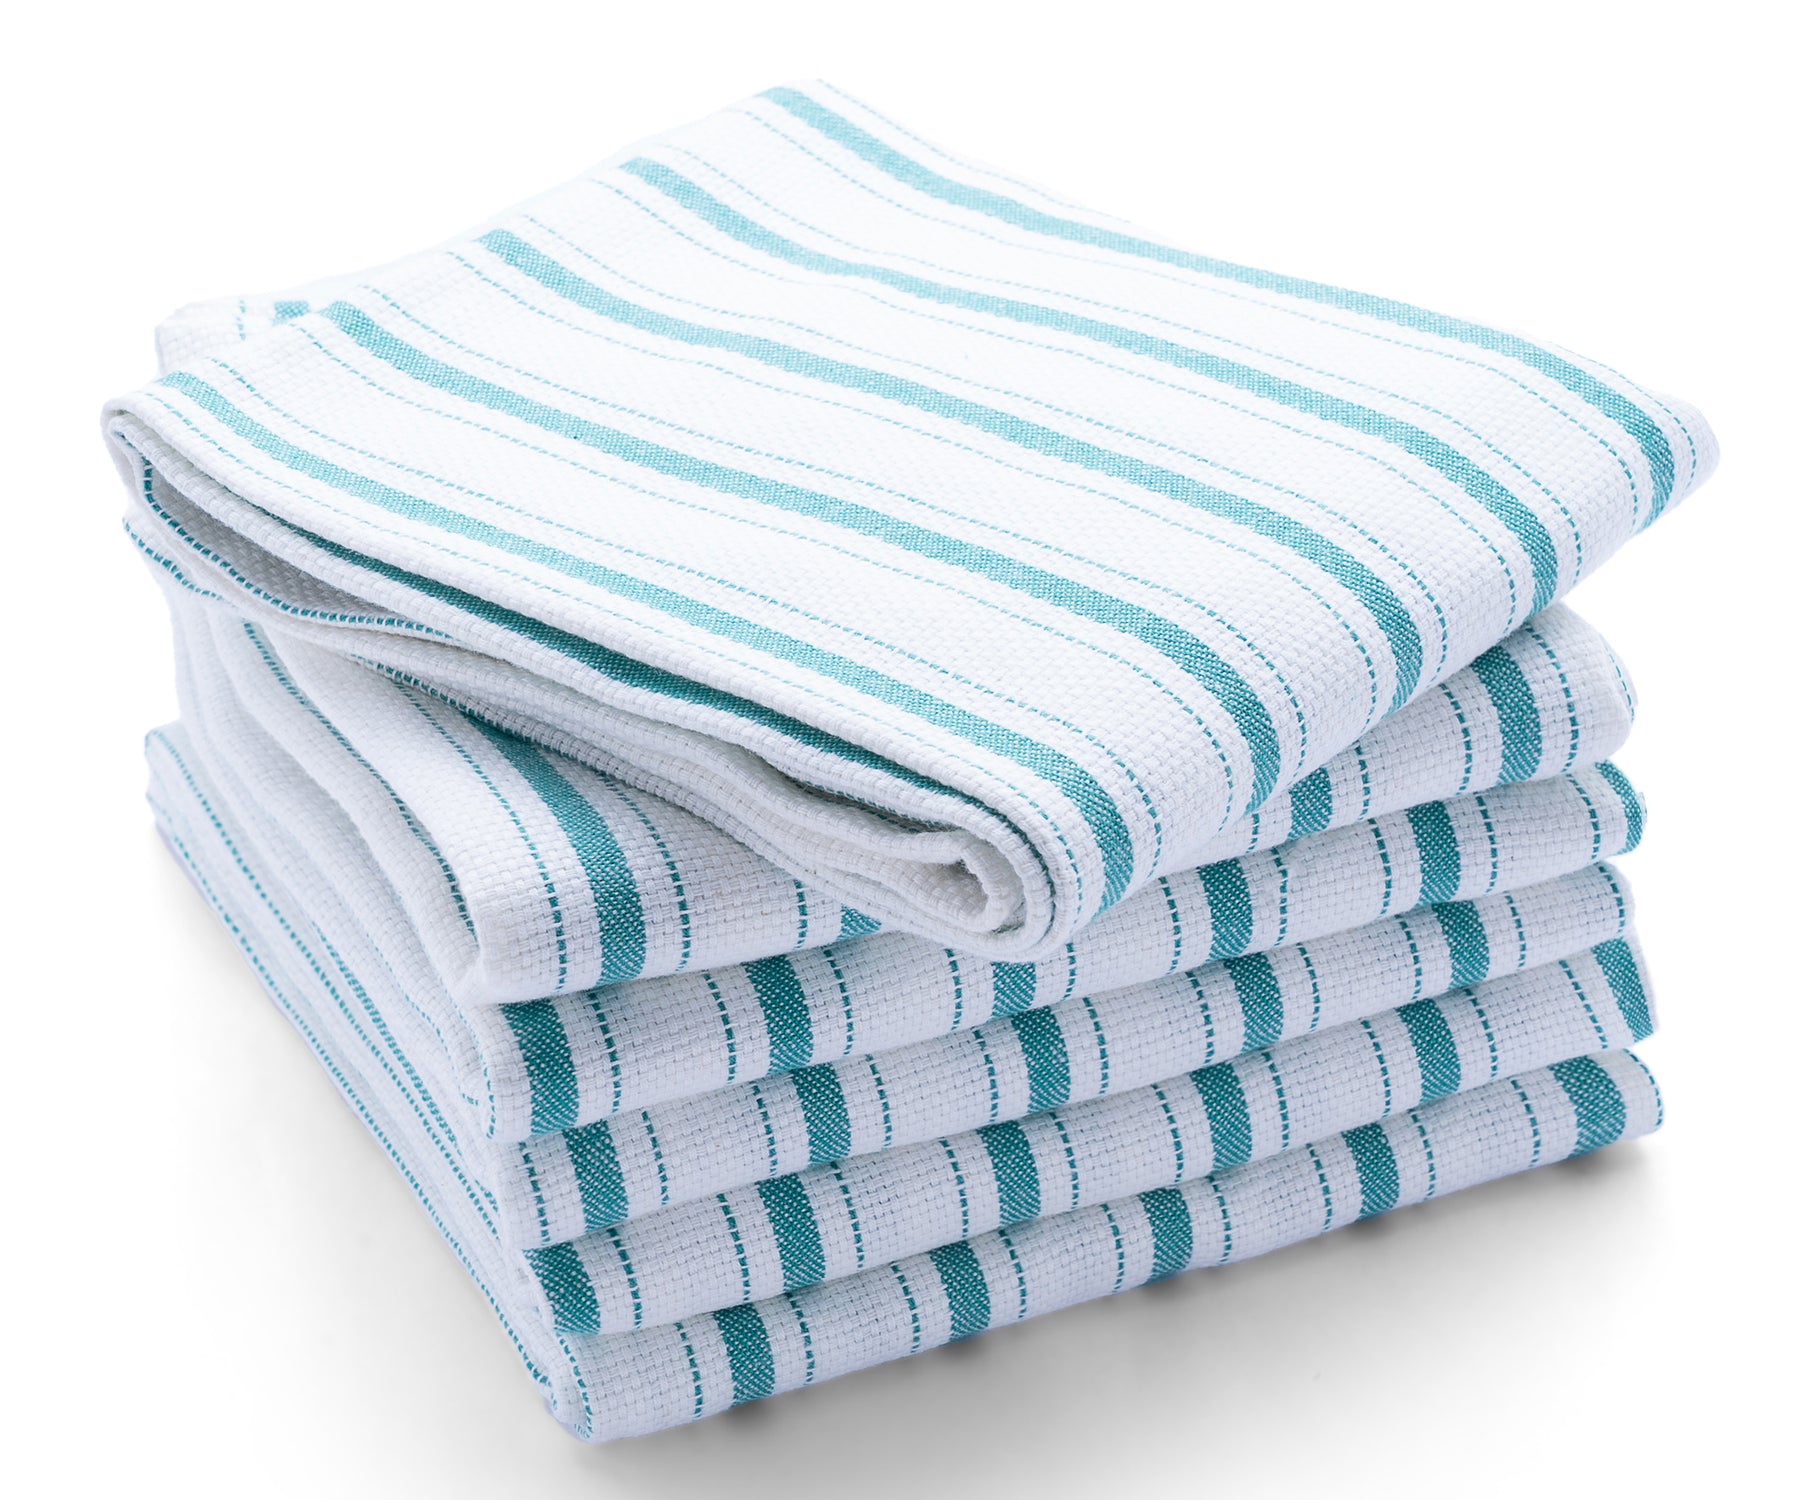 Linen dish towels with hanging loops, white and teal striped kitchen towels, linen kitchen towels, kitchen towel set , cotton dish towels